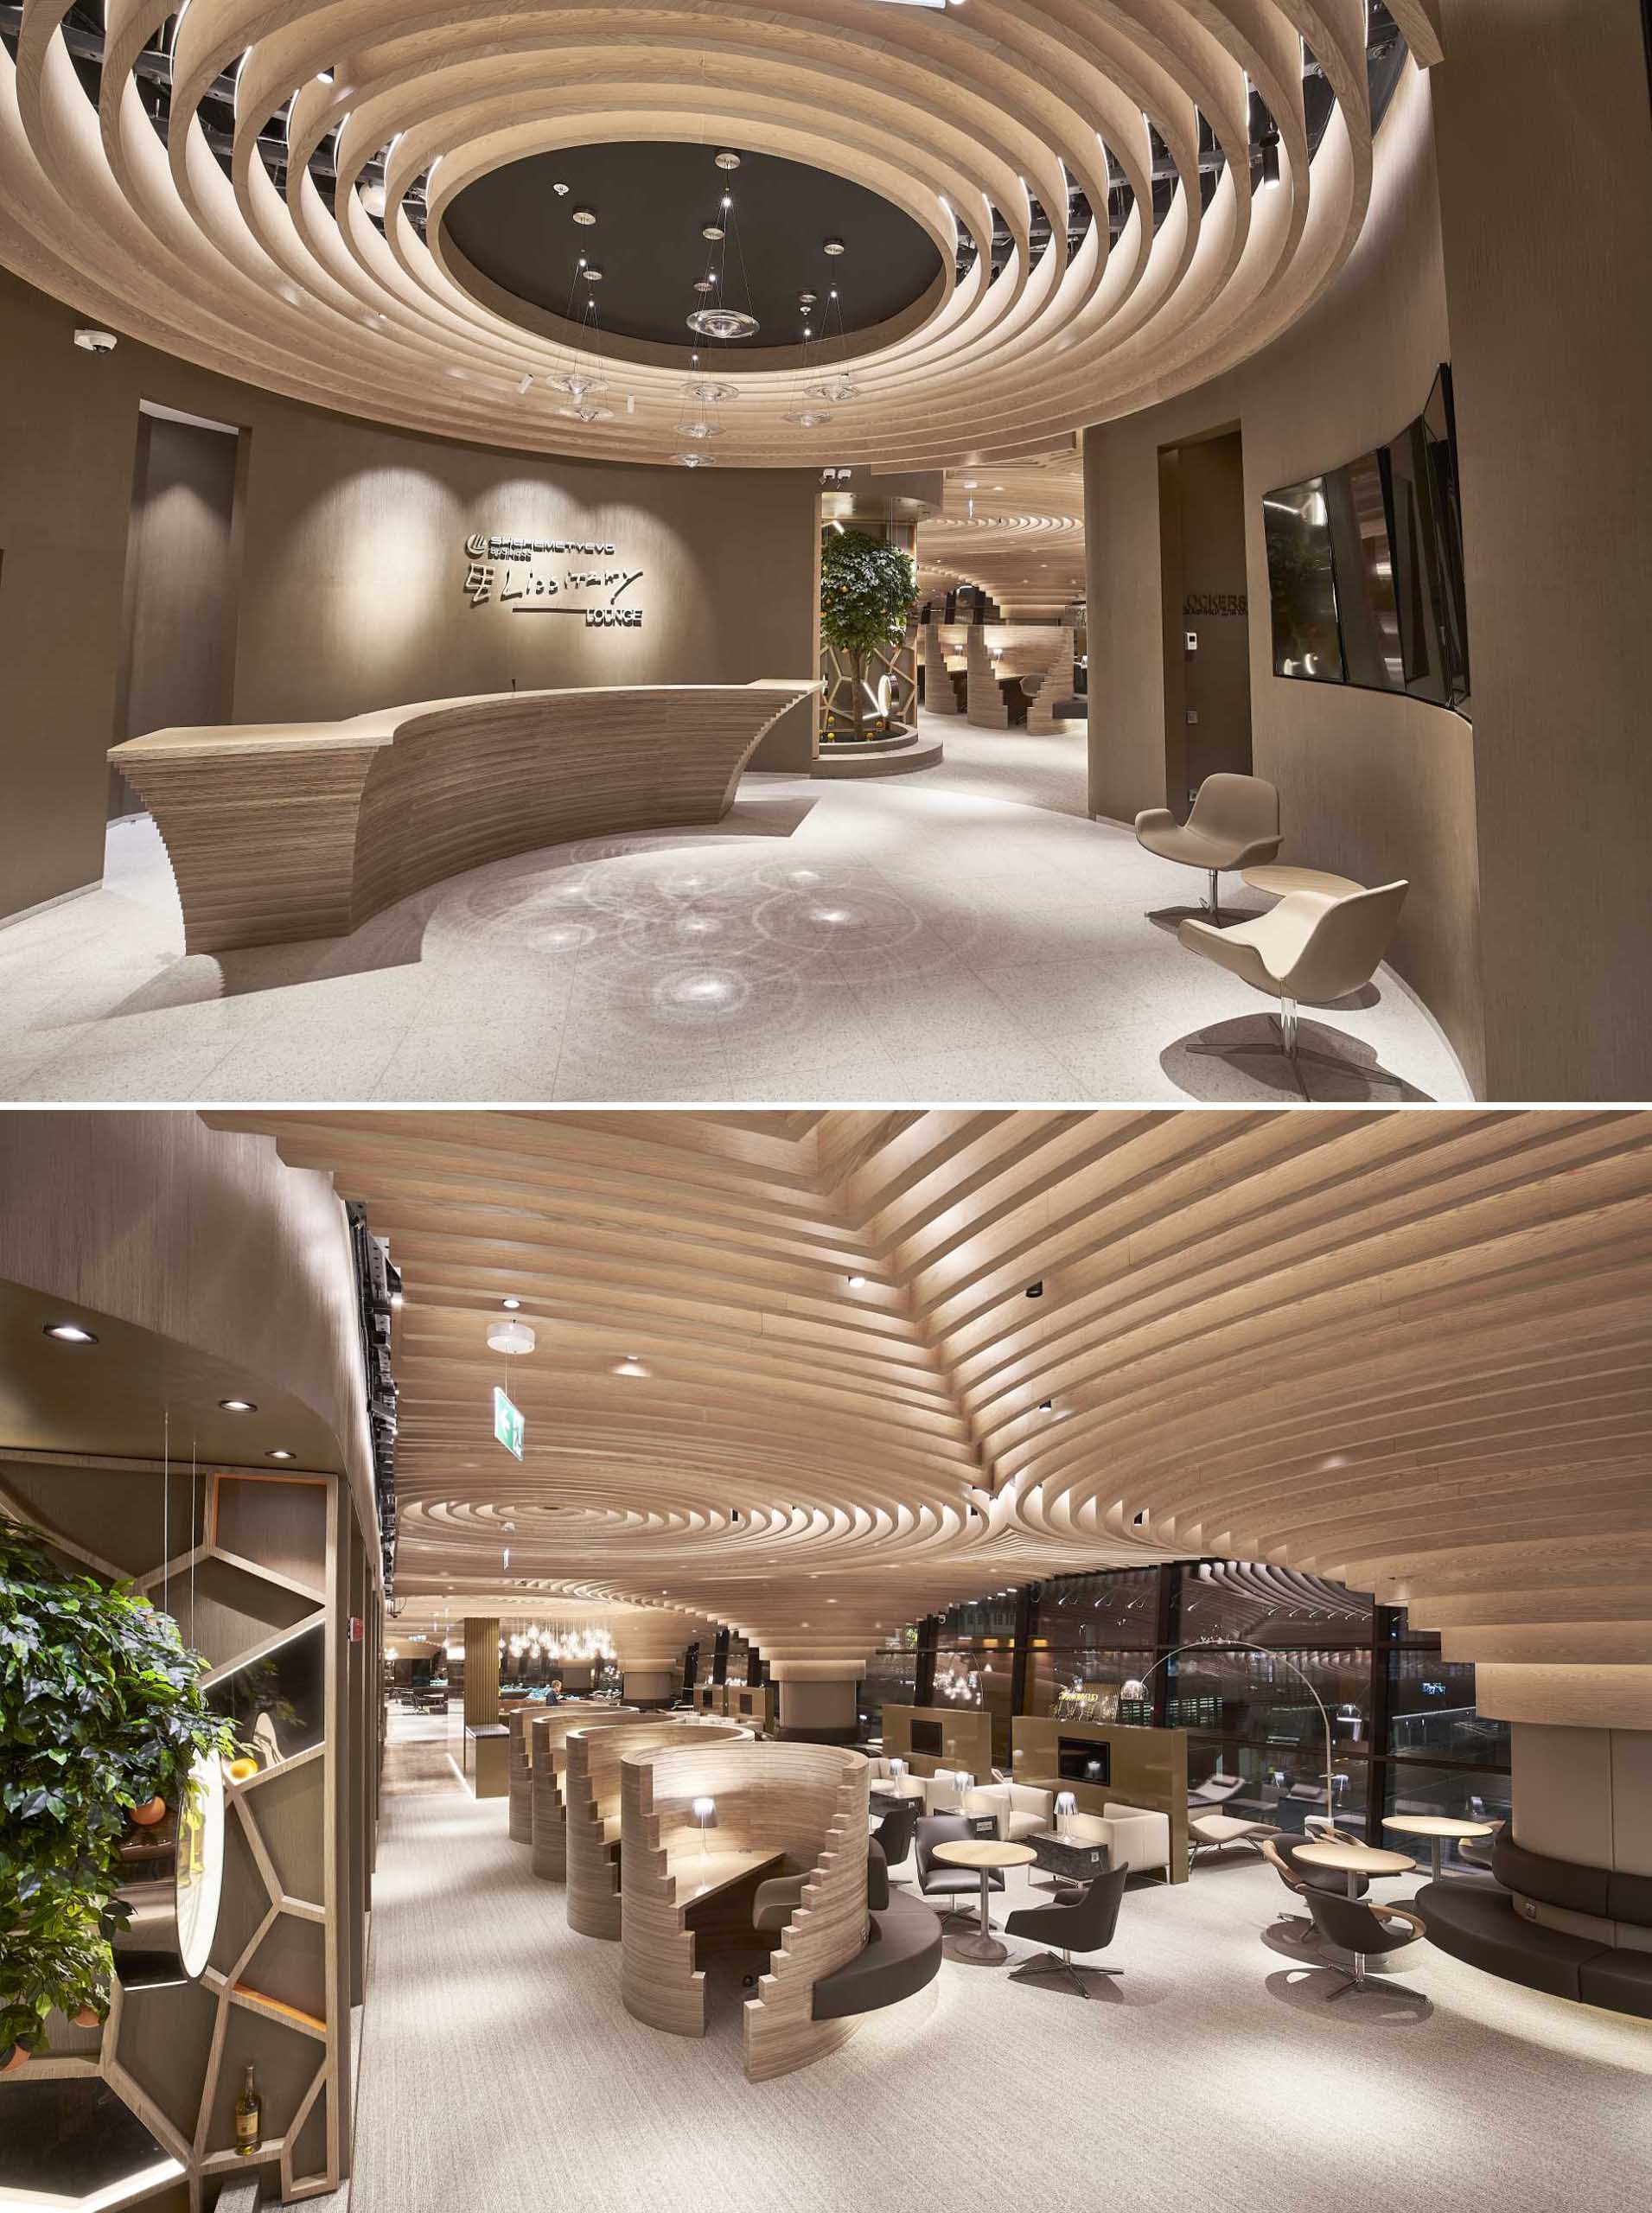 A modern airport lounge with circular wood design elements on the ceiling.